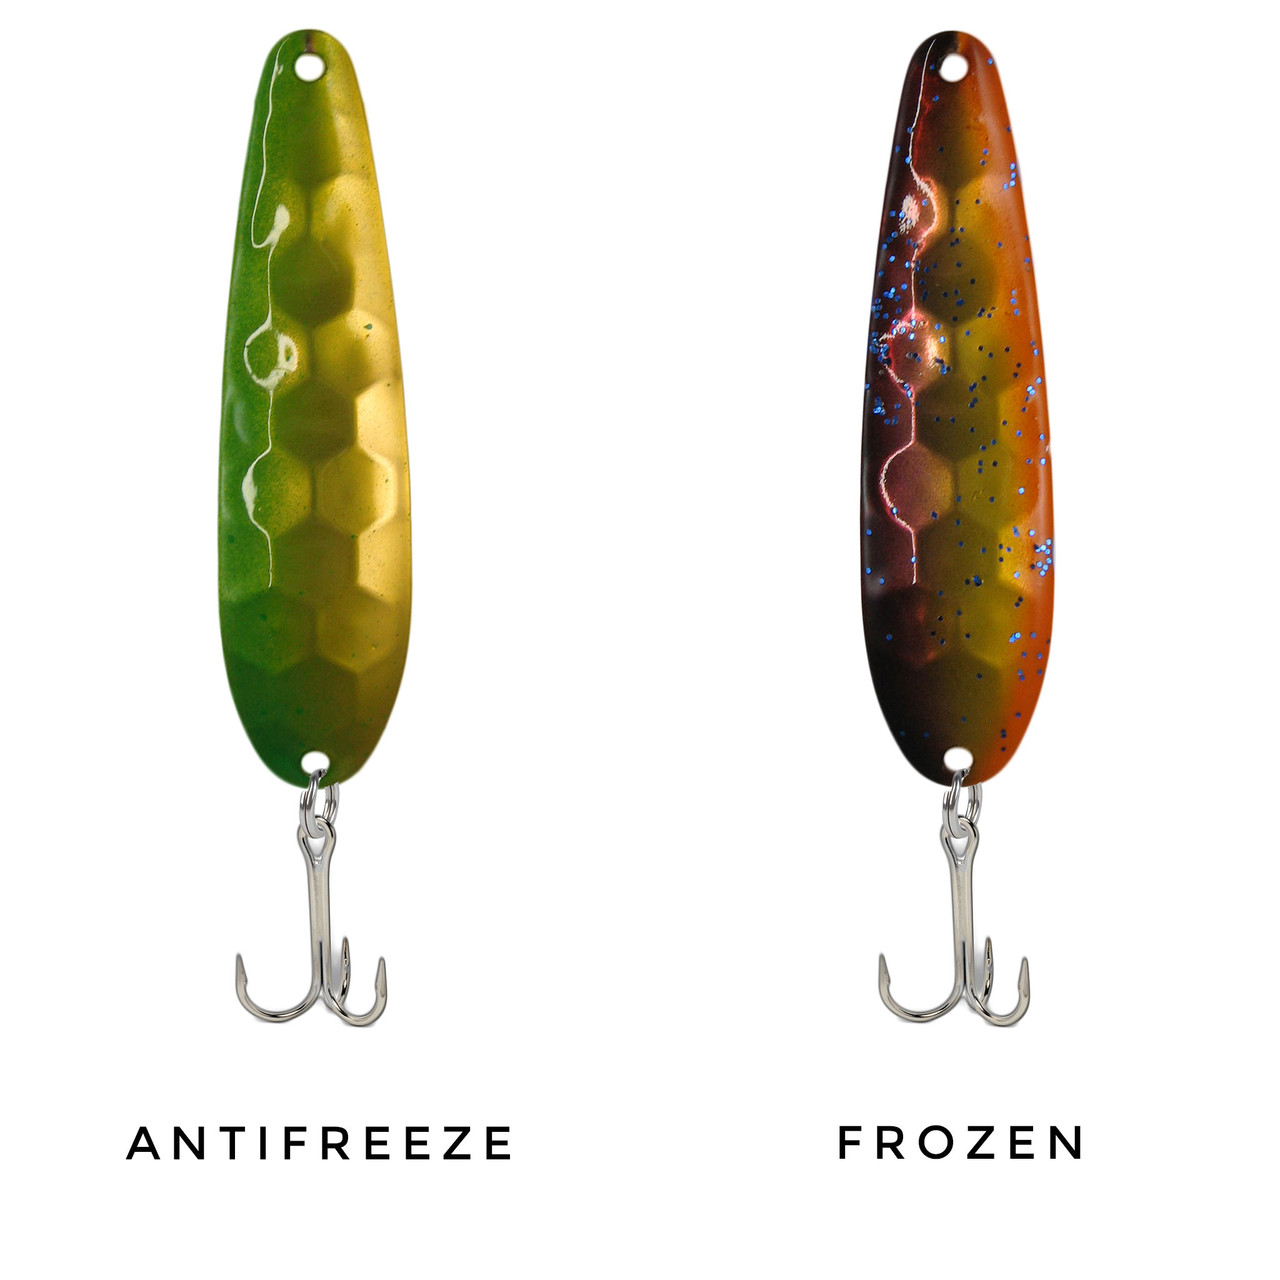 The 5 Best Walleye Spoons for Your Tackle Box - Green Bay Trophy Fishing